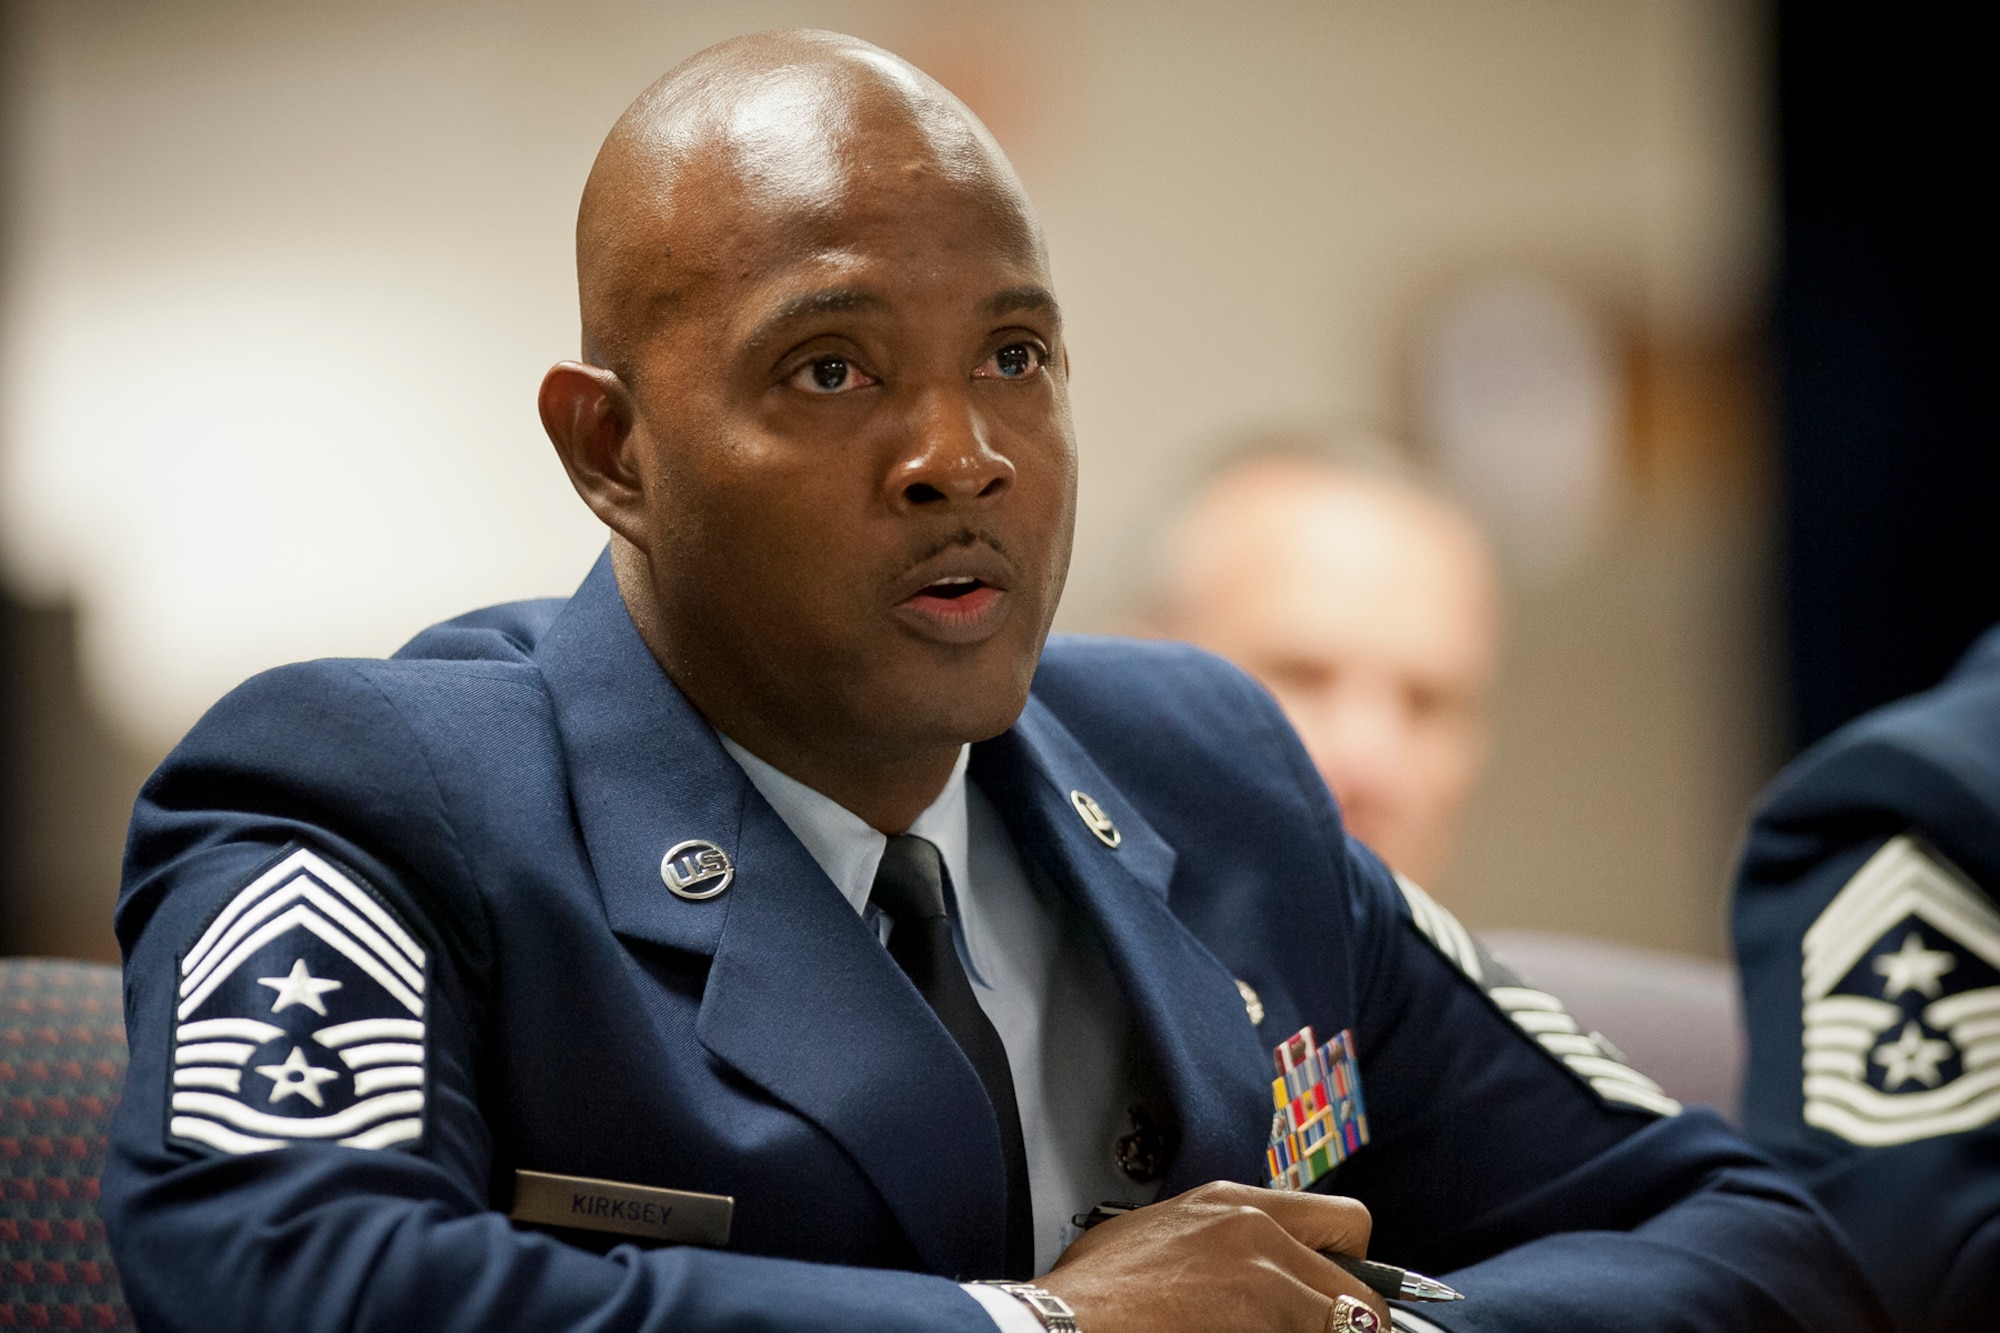 Chief Master Sgt. Cameron B. Kirksey, the Command Chief Master Sergeant of the Air Force Reserve Command, testifies to the National Commission of the Structure of the Air Force on October 25, 2013 in Arlington, Va. The National Commission of the Structure of the Air Force was established by Congress this year to comprehensively study the U.S. Air Force and it three components - active, reserve and Air National Guard - and determine how the Air Force's structure should be modified to best fill current and future mission requirements, including homeland defense, with available resources. 